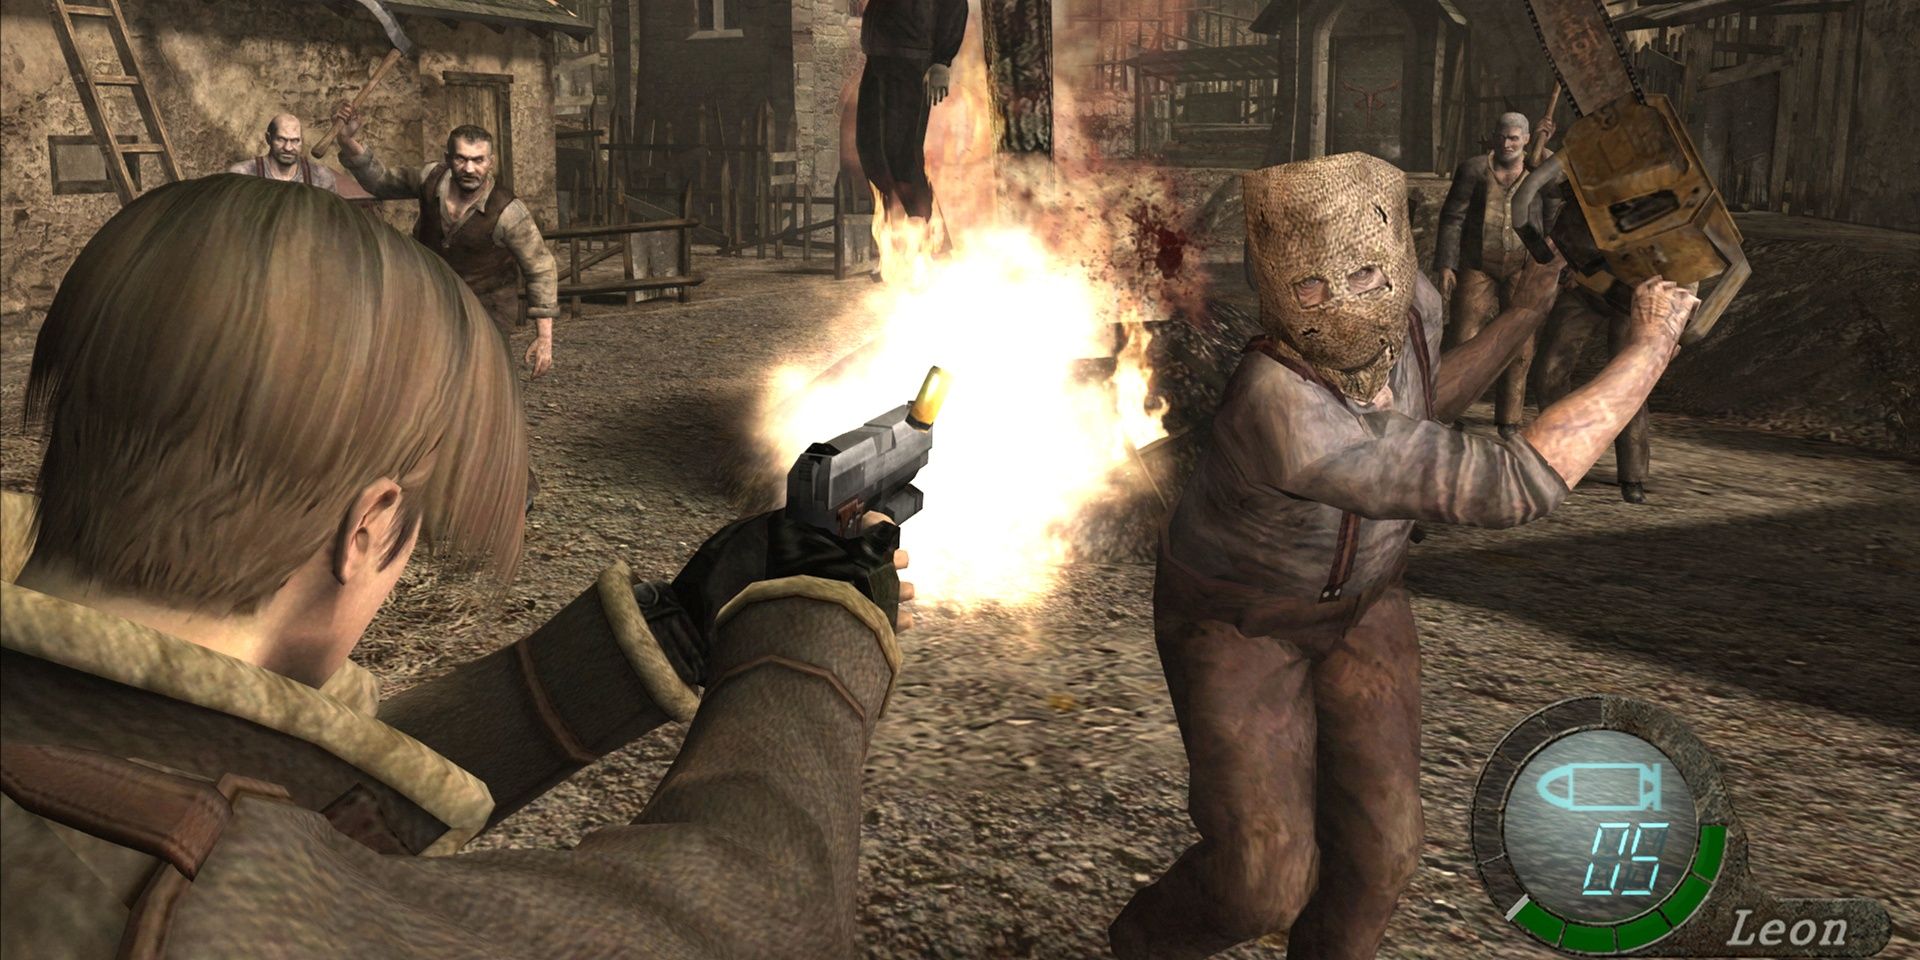 Leon firing his handgun at the brute chainsaw enemy with other villagers coming up from behind in the game's first section.